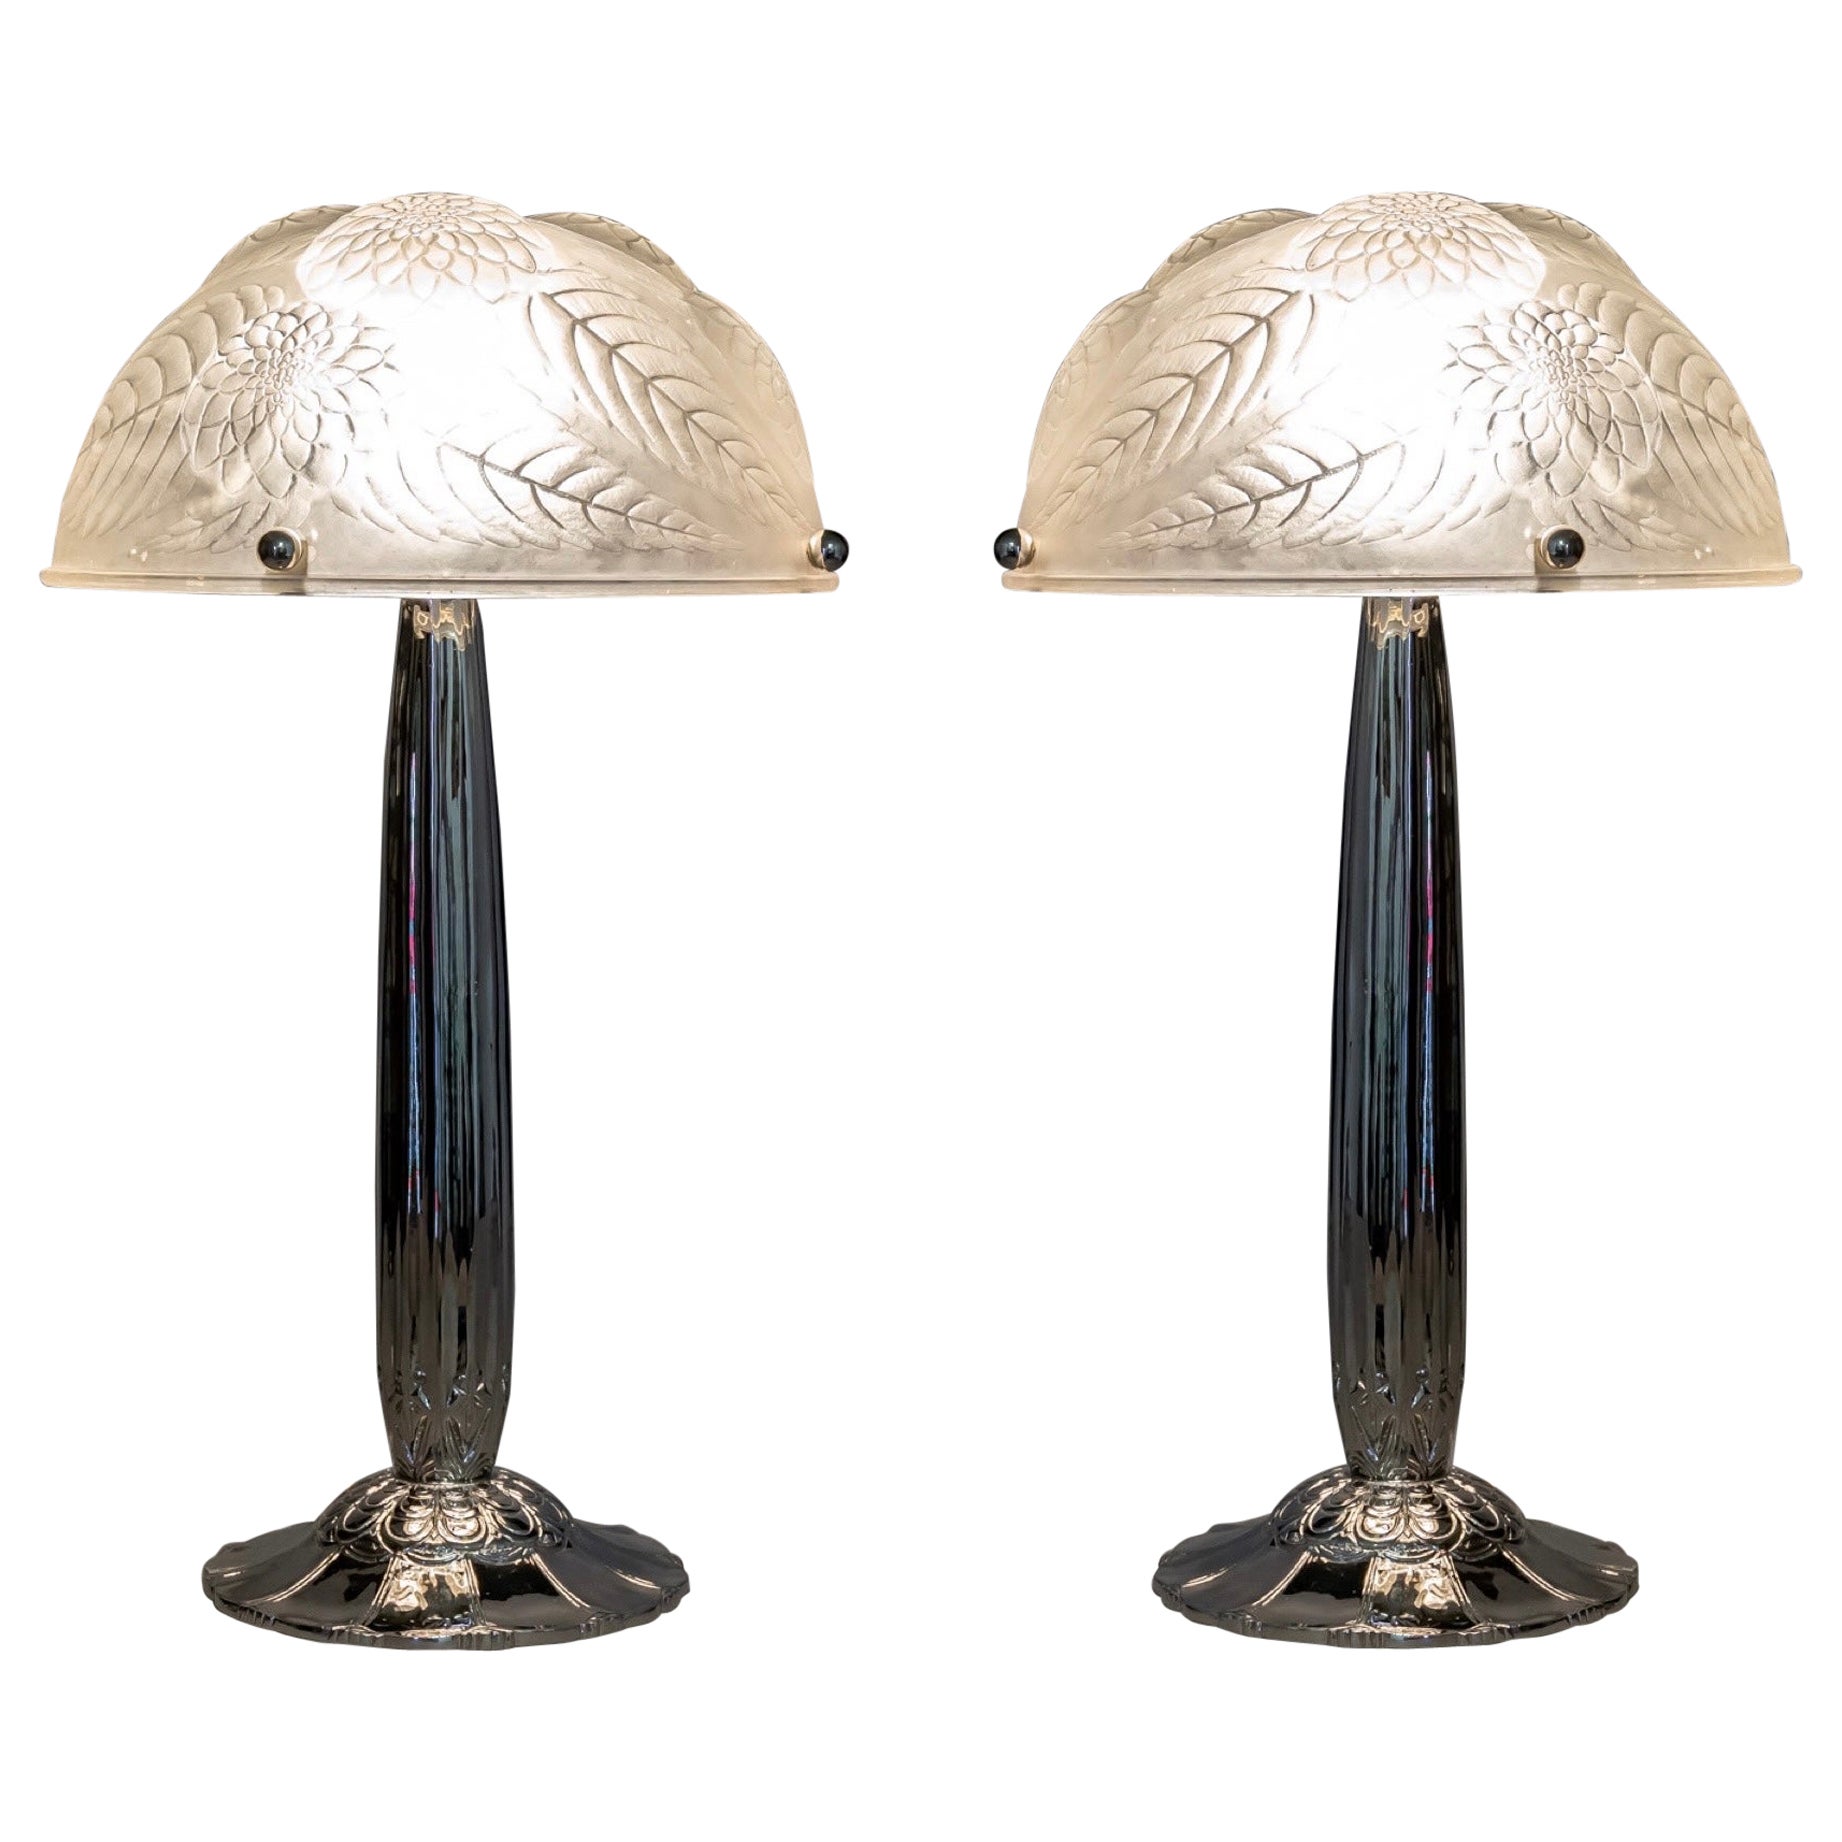 1921 René Lalique Pair of Lamps Dahlias Frosted Glass Nickel-plated Bronze Feet